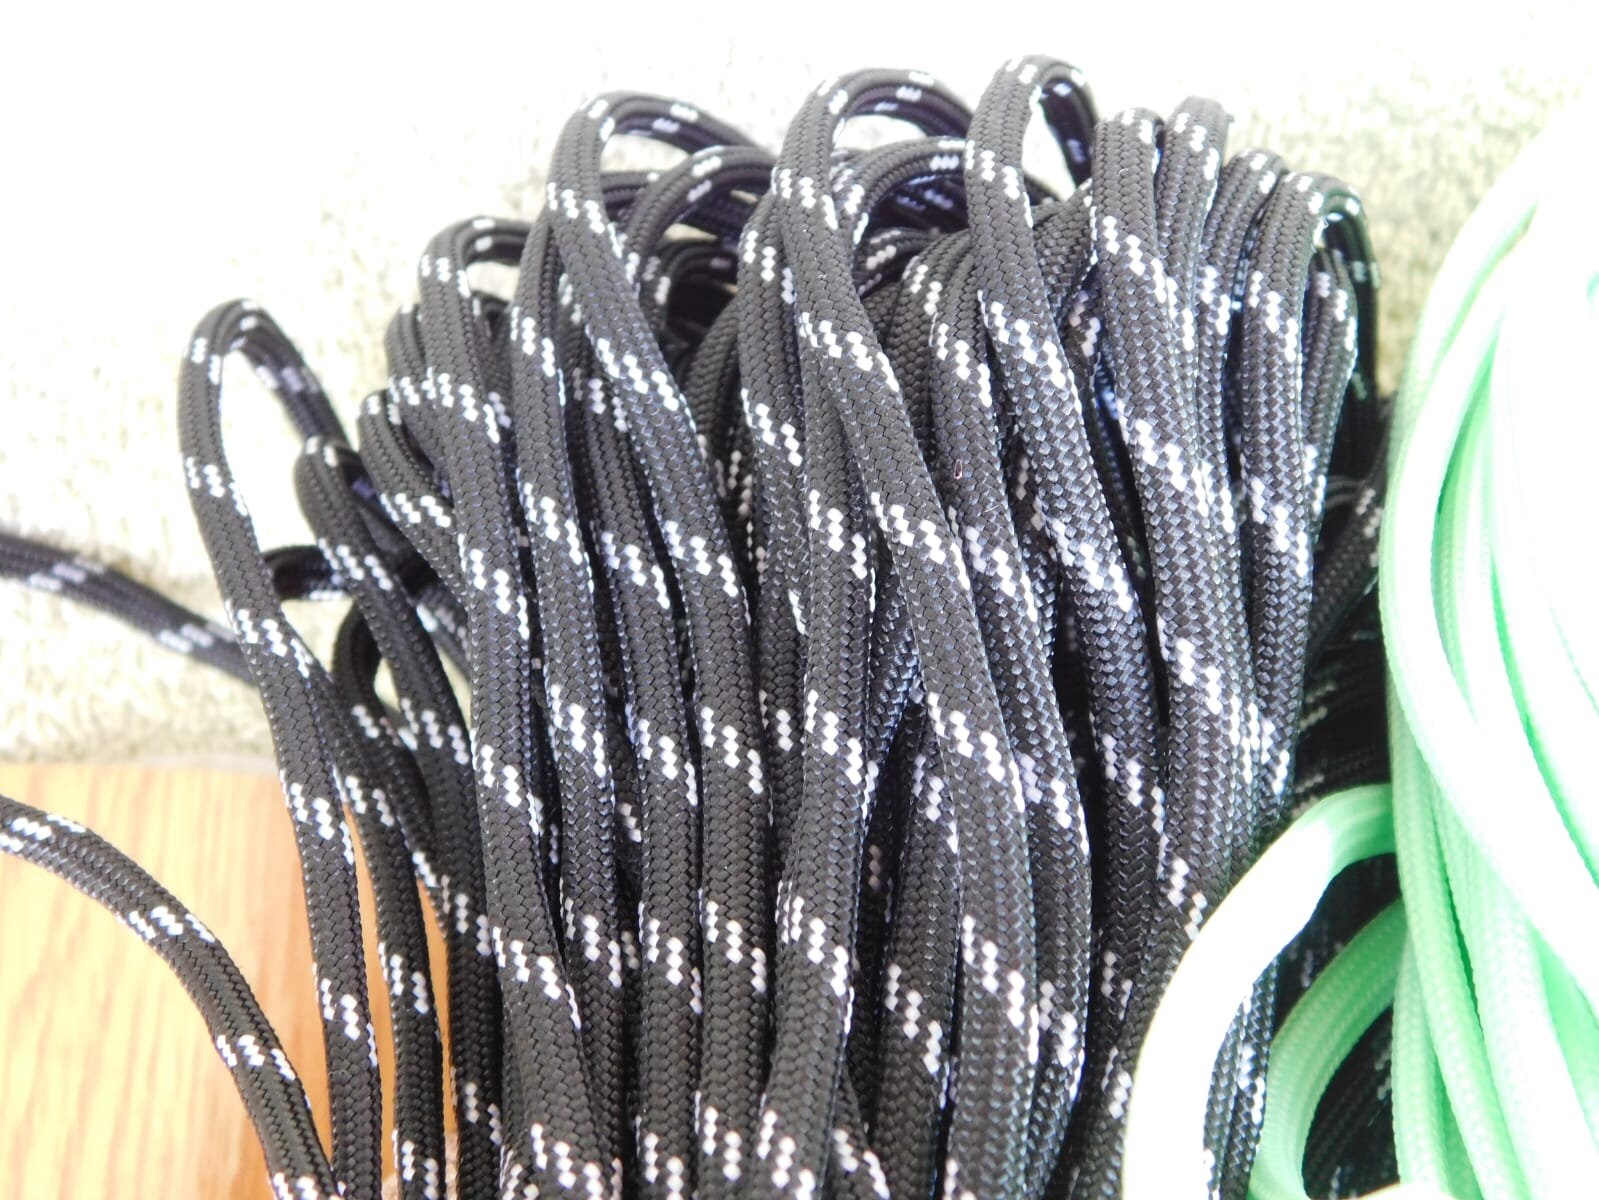 Glow in the Dark Paracord 550 Paracord Black White Green